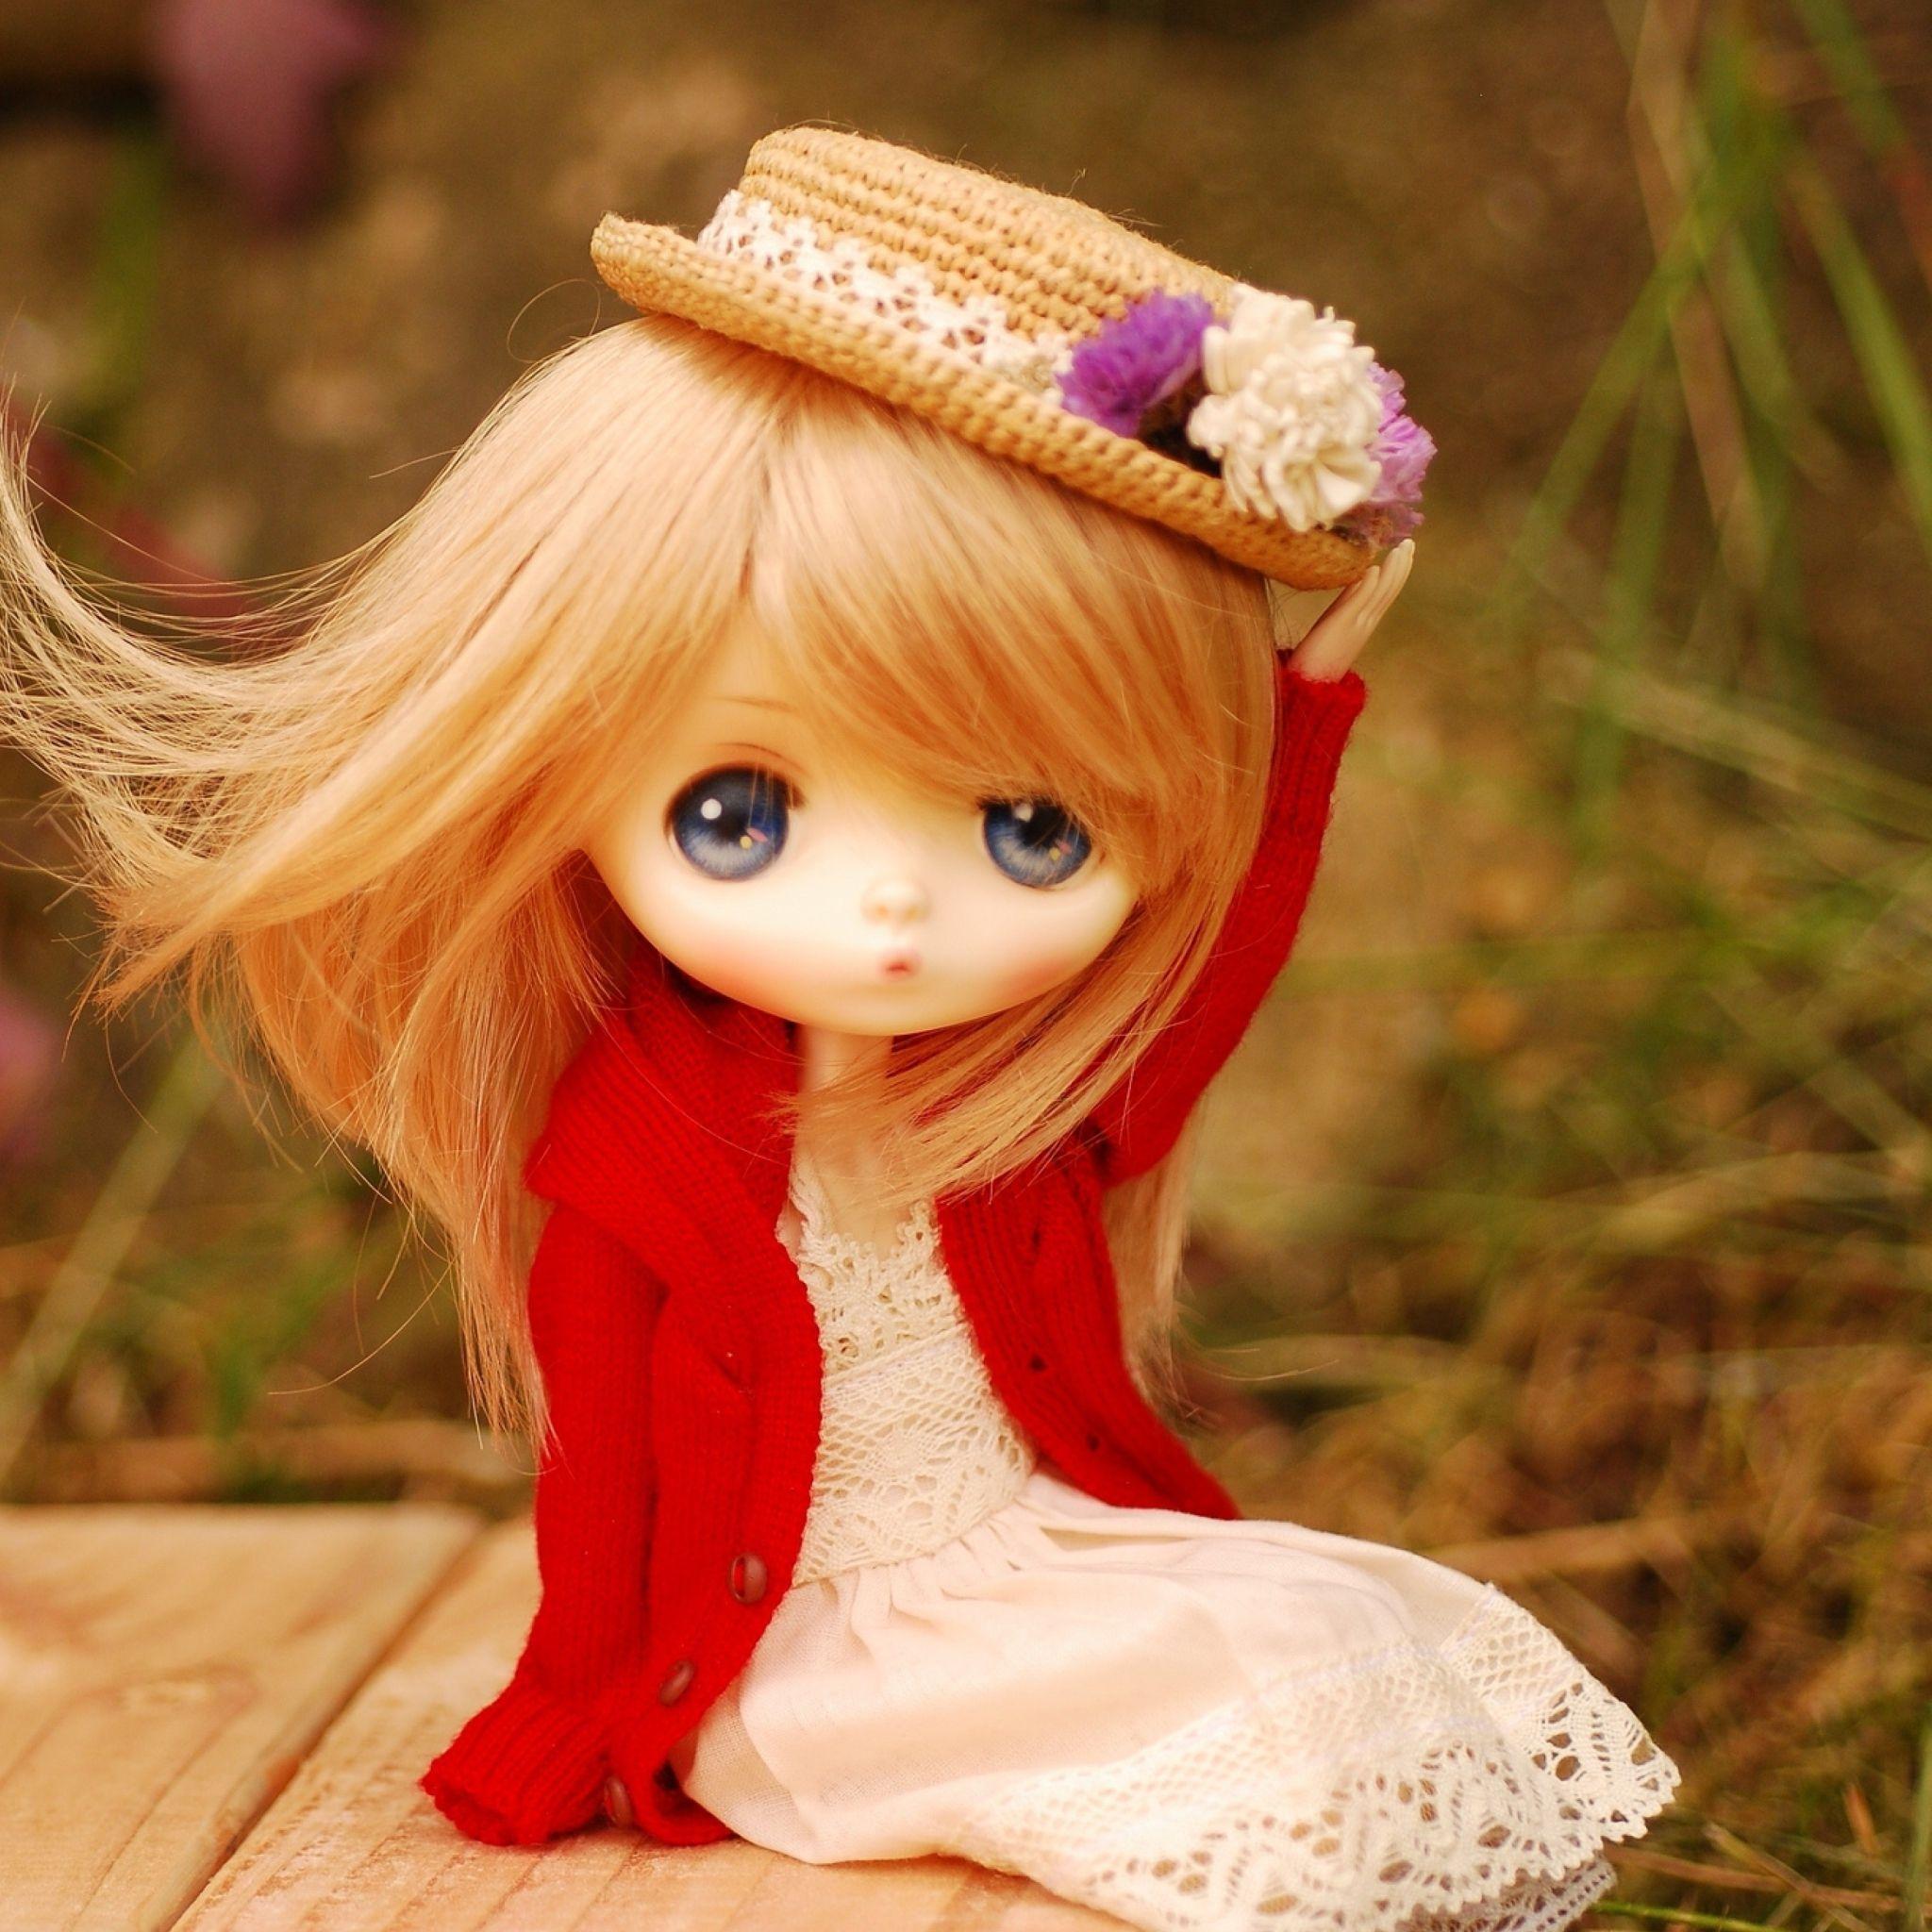 Love Doll Pic Wallpapers - Wallpaper Cave